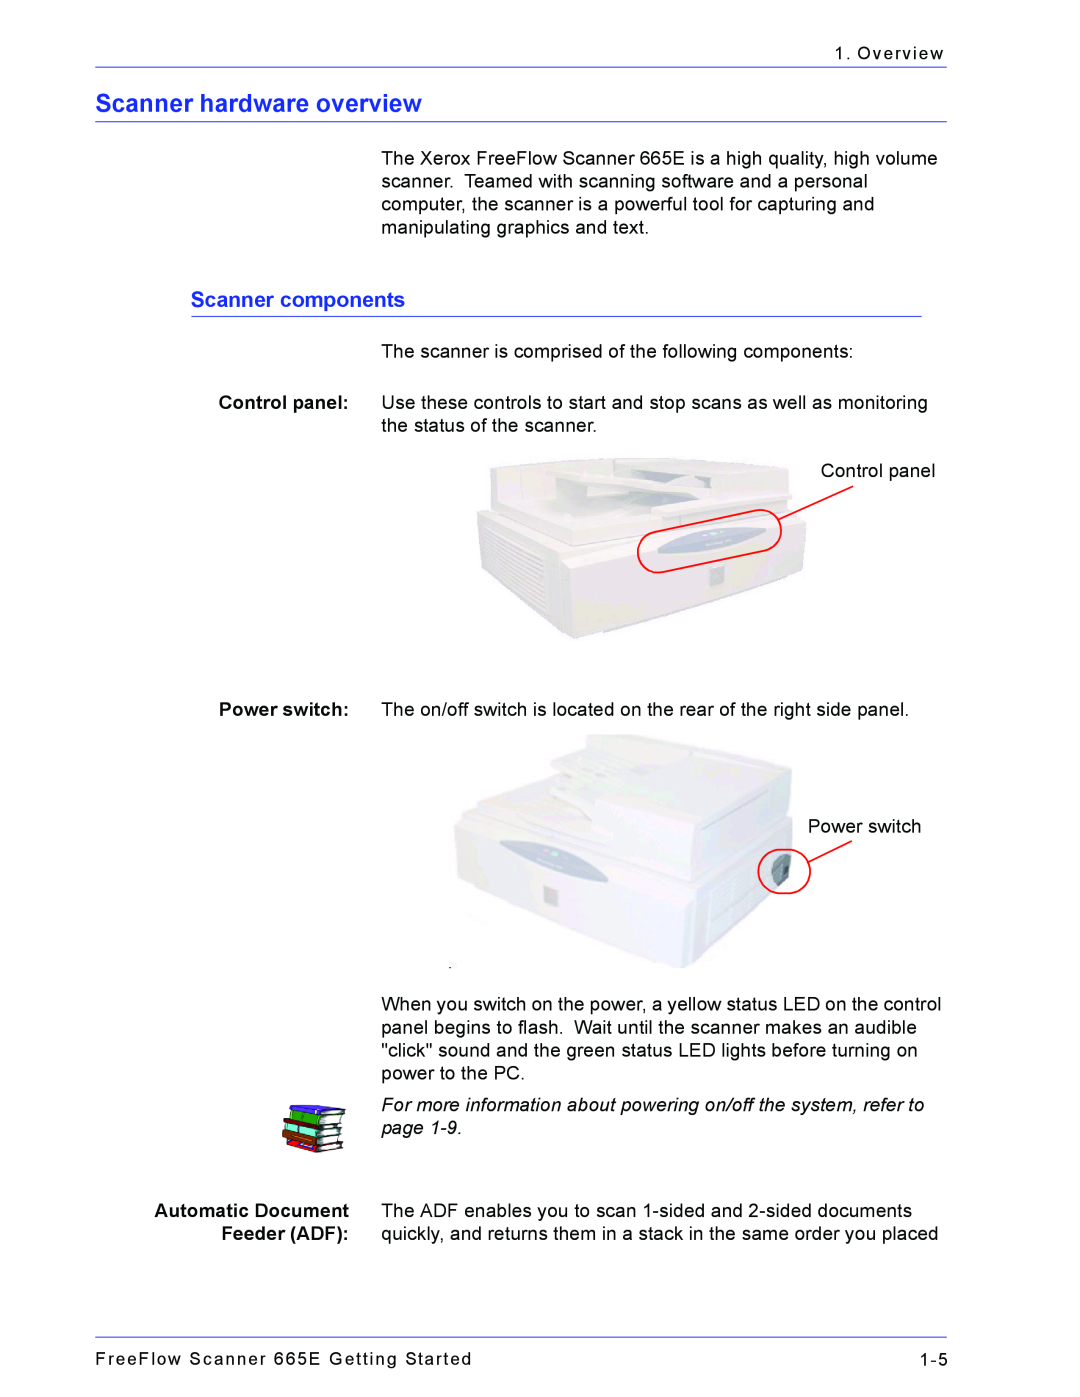 Xerox 665E manual Scanner hardware overview, Scanner components 